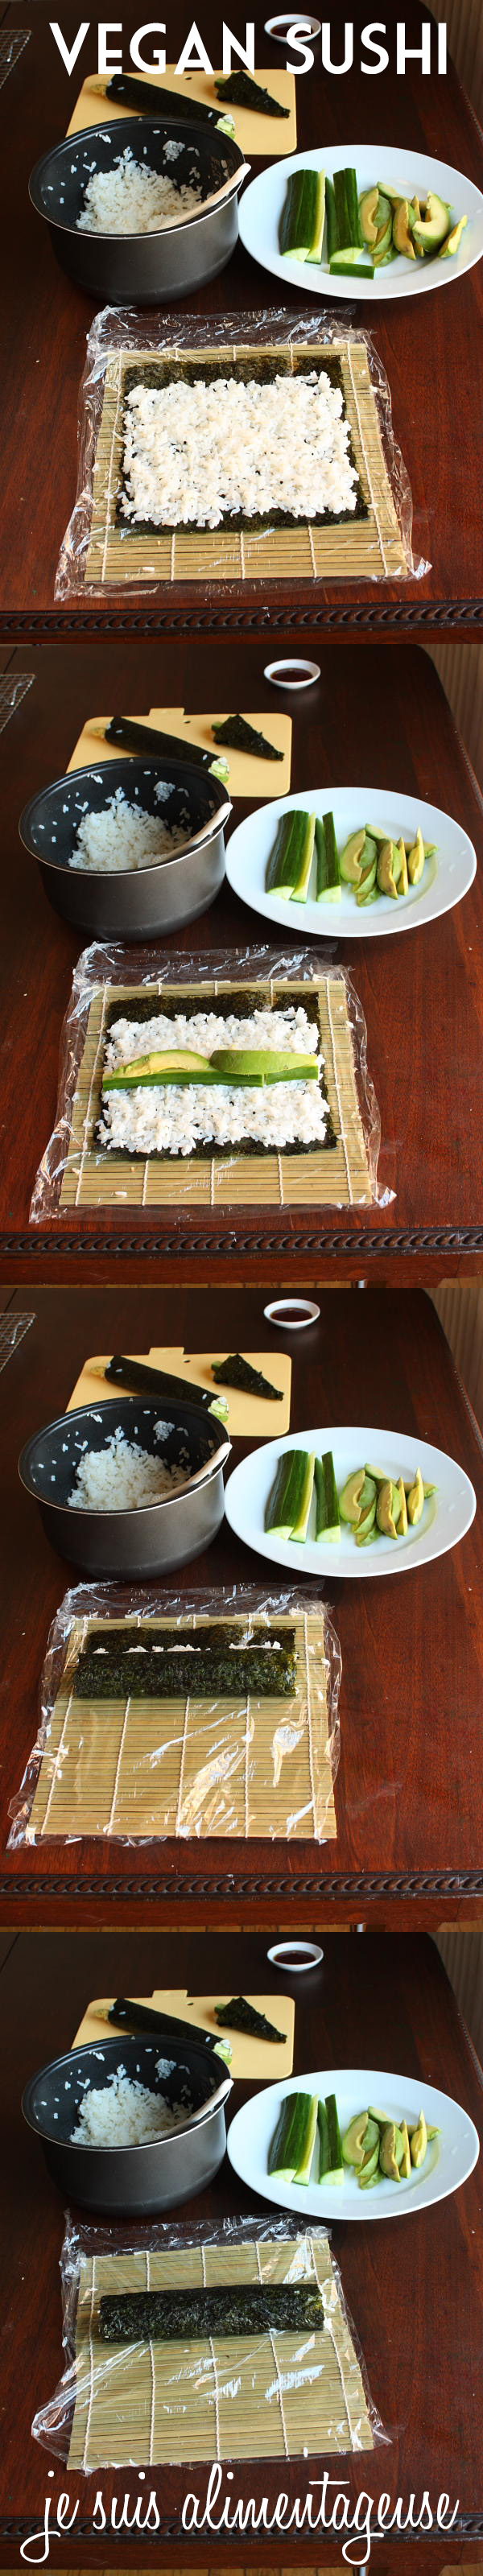 Avocado Cucumber Sushi - How to make sushi step-by-step at home! | alimentageuse.com #appetizers #vegan #avocado #sushi